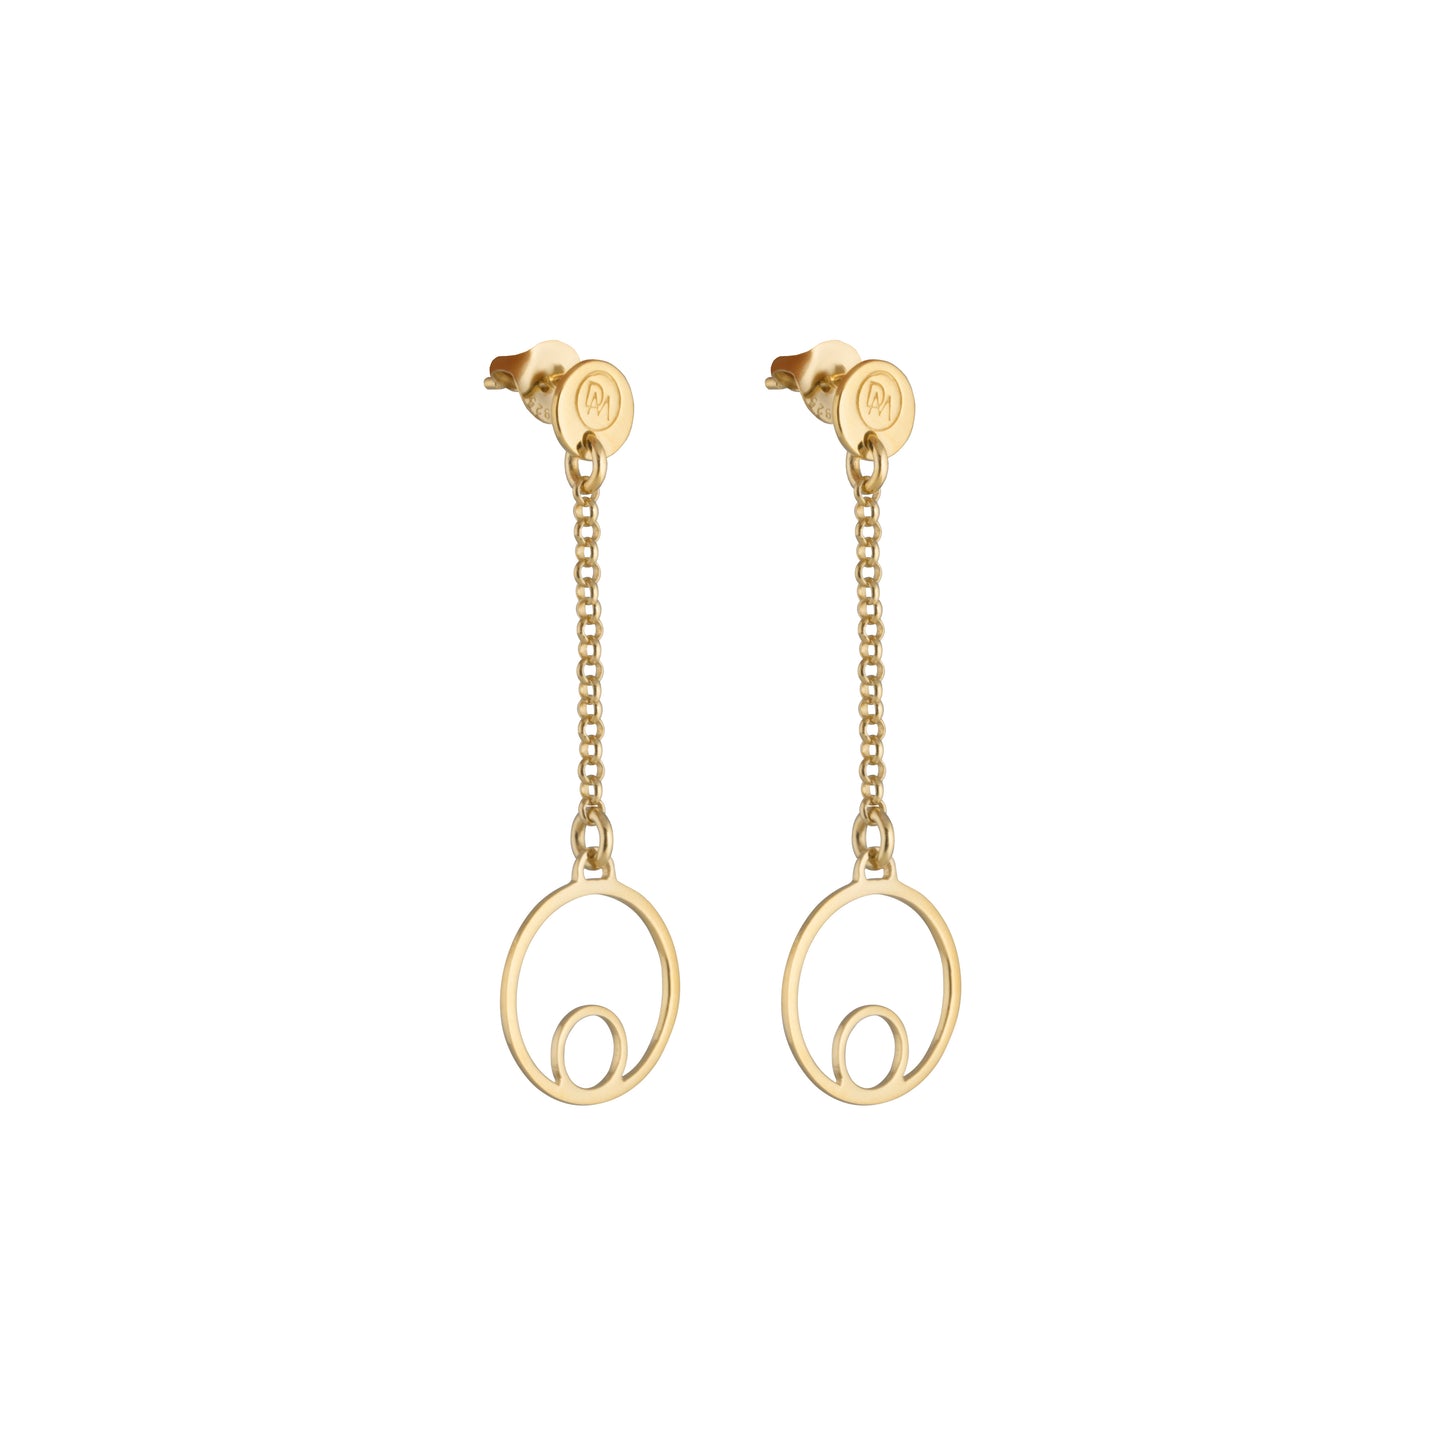 Gentle earrings with circle-shaped pendants from iconic Circles collection. Designed in minimalist style, these earrings are lightweight and playful.   Combine them with Circles Necklace.   Material: 18 karat gold-plated silver.  Size: outer circles diameter is 10mm, the length of the earring is approximately 5cm. 